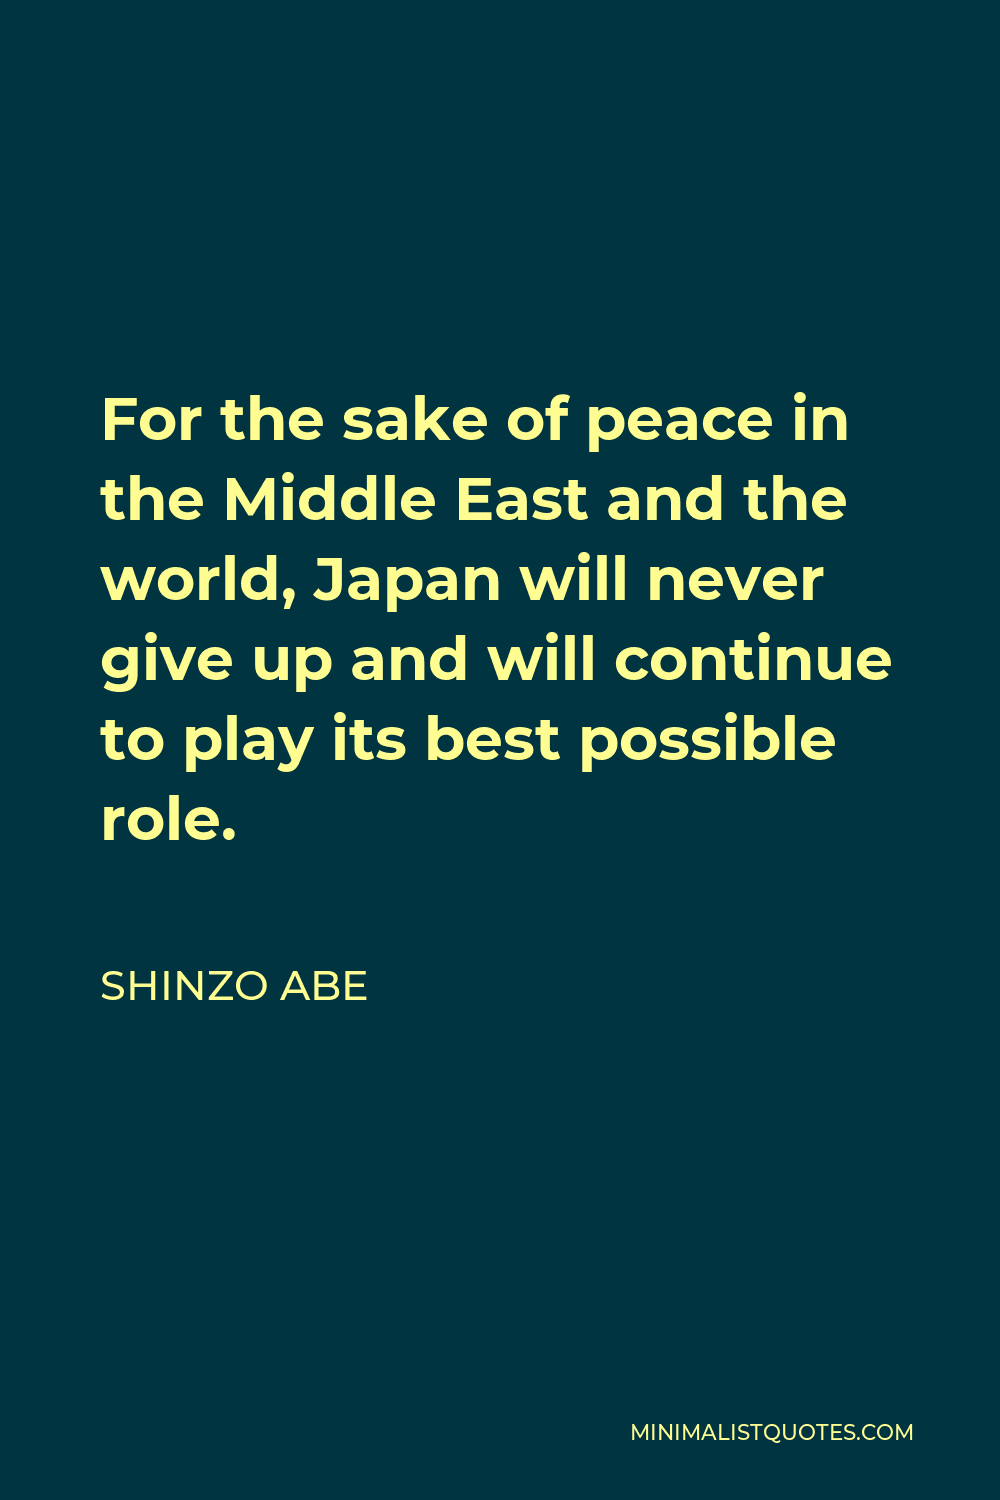 Shinzo Abe Quote - For the sake of peace in the Middle East and the world, Japan will never give up and will continue to play its best possible role.